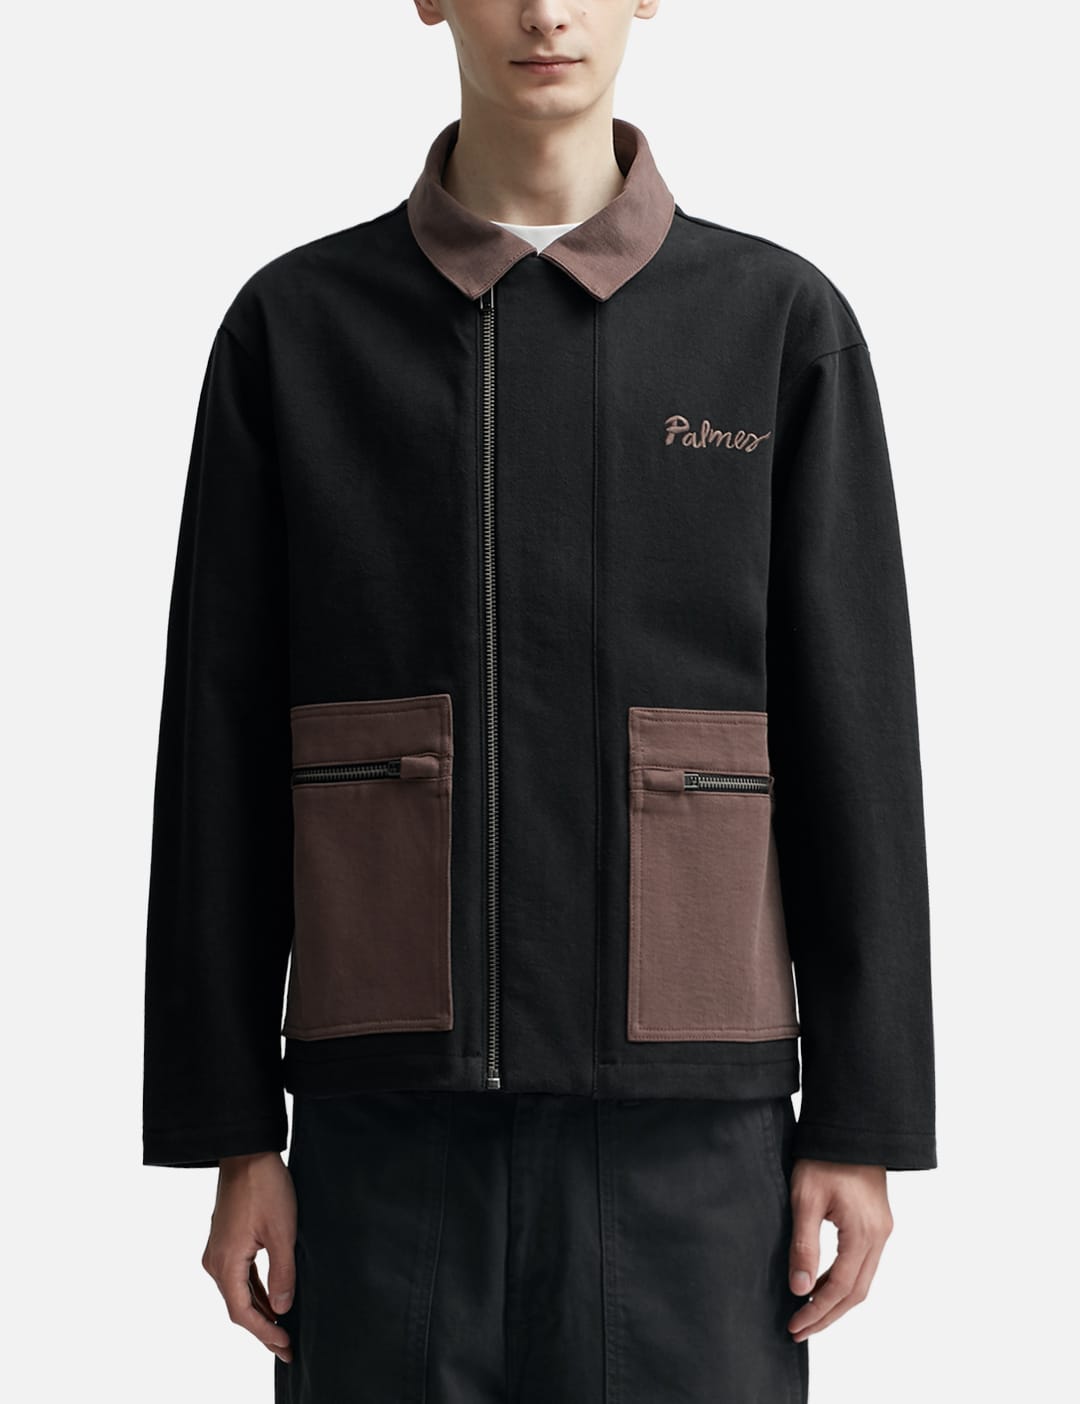 Palmes - Double Zip Jacket | HBX - Globally Curated Fashion and